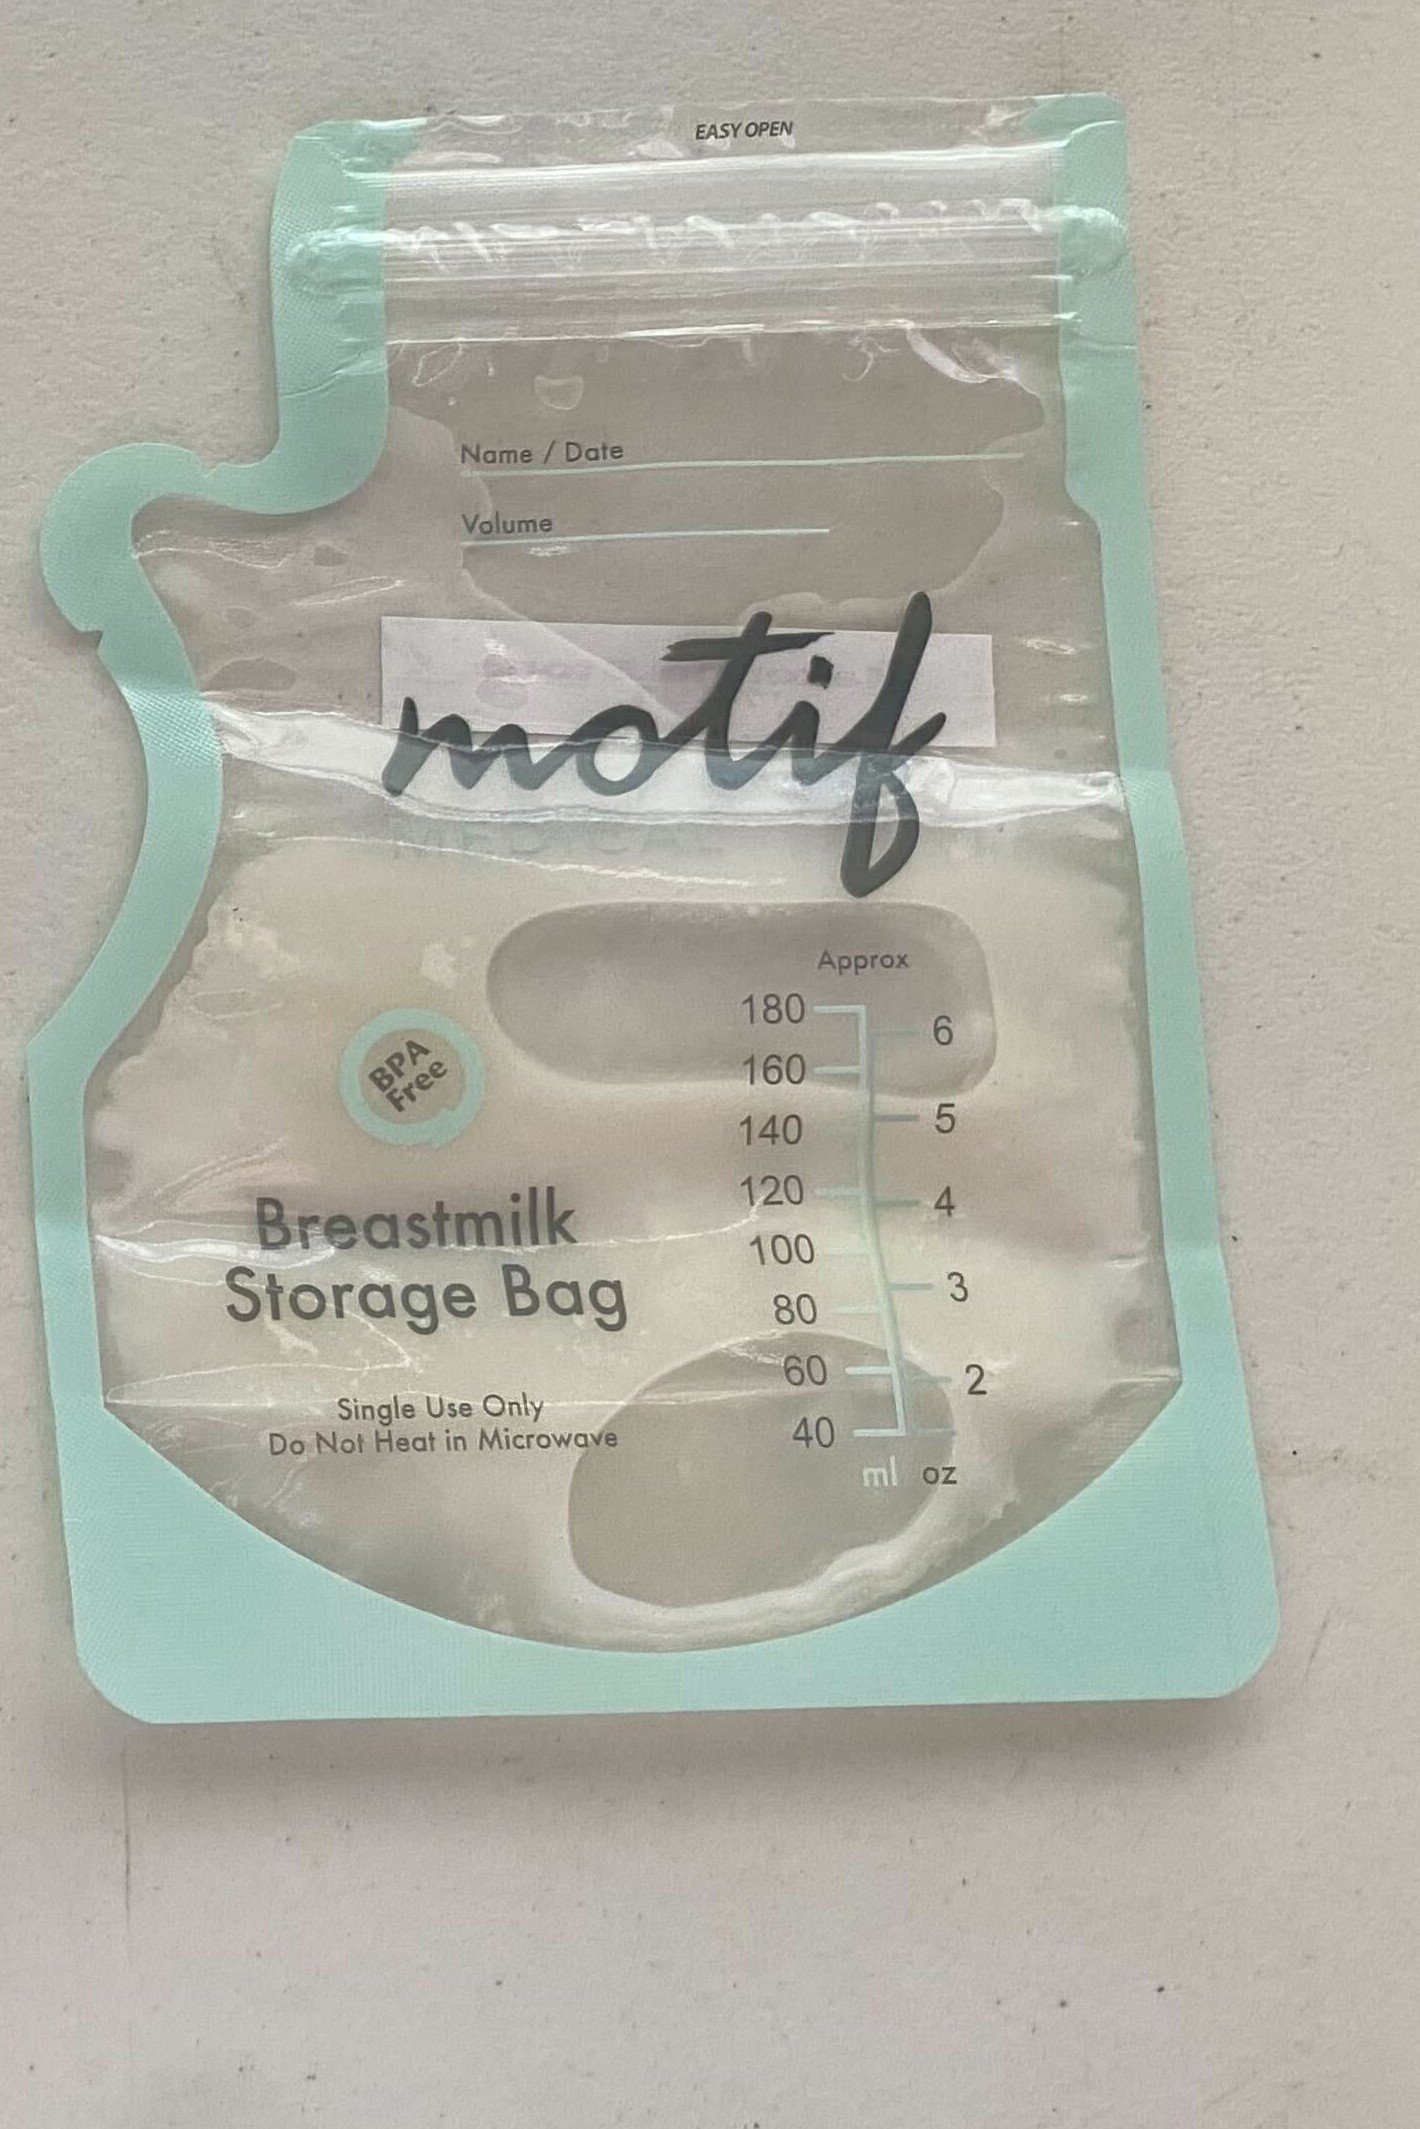 6 Best Breast Milk Storage Bags & Containers 2023